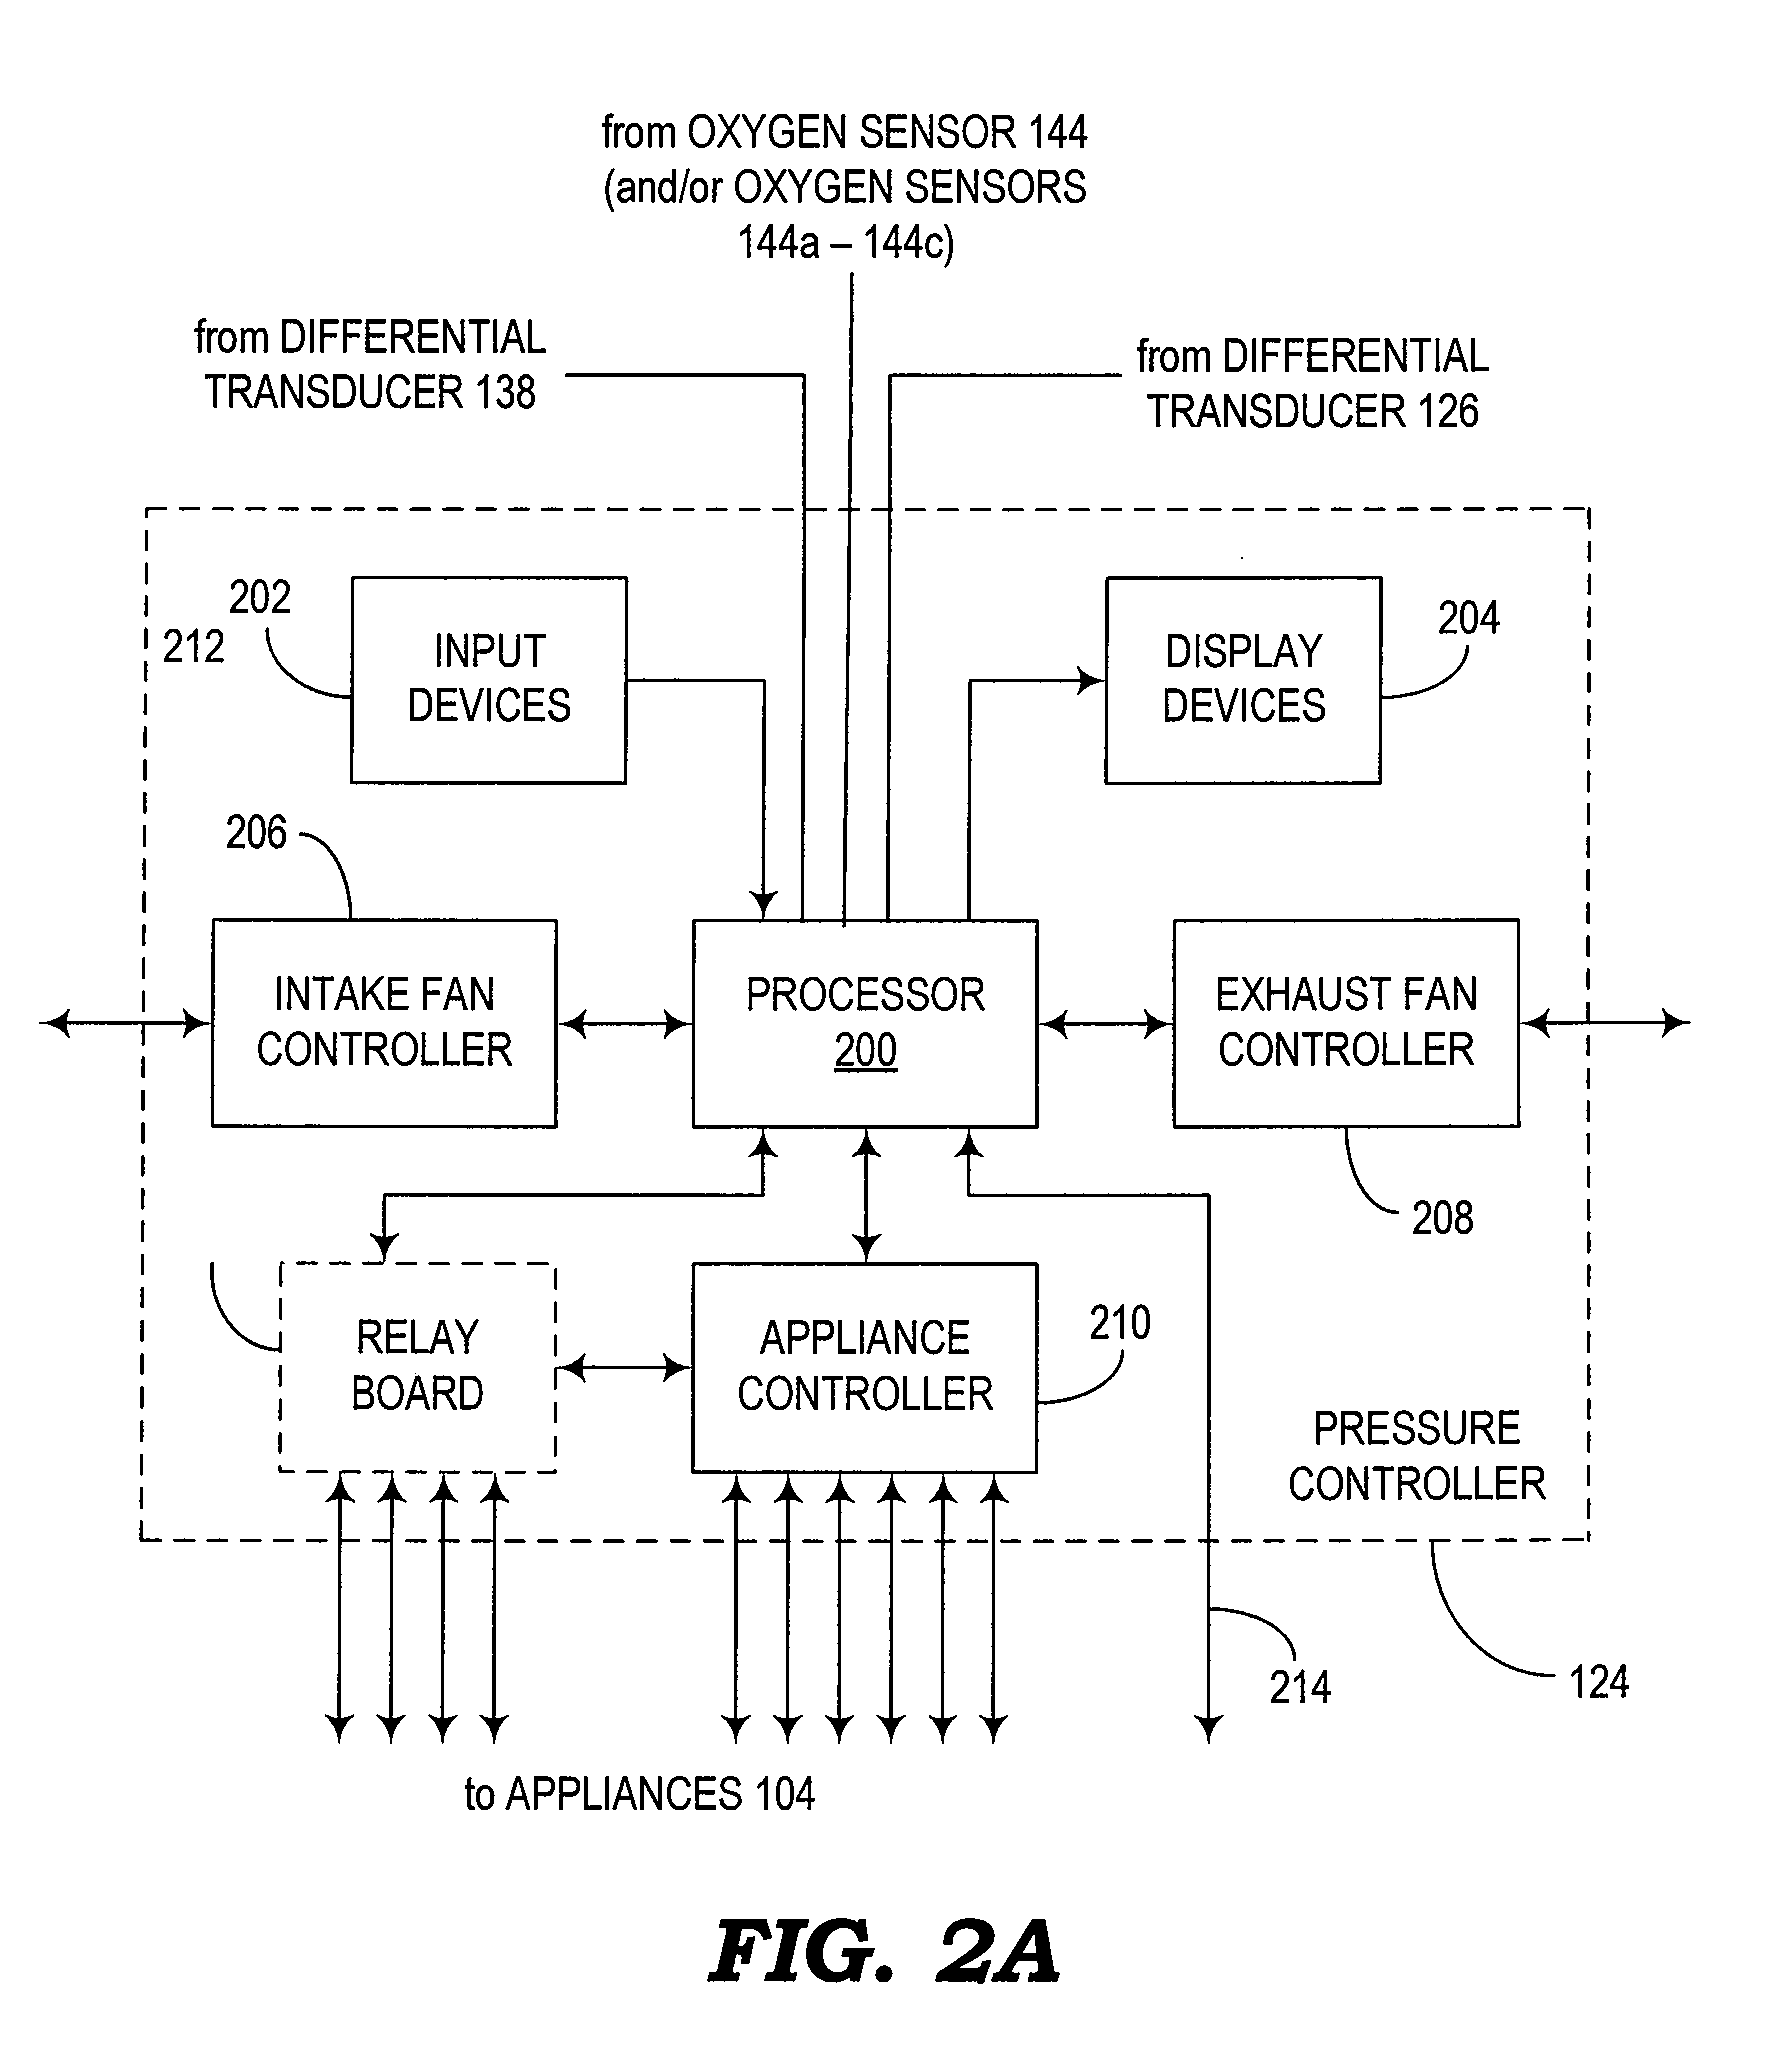 Pressure Controller for a Mechanical Draft System